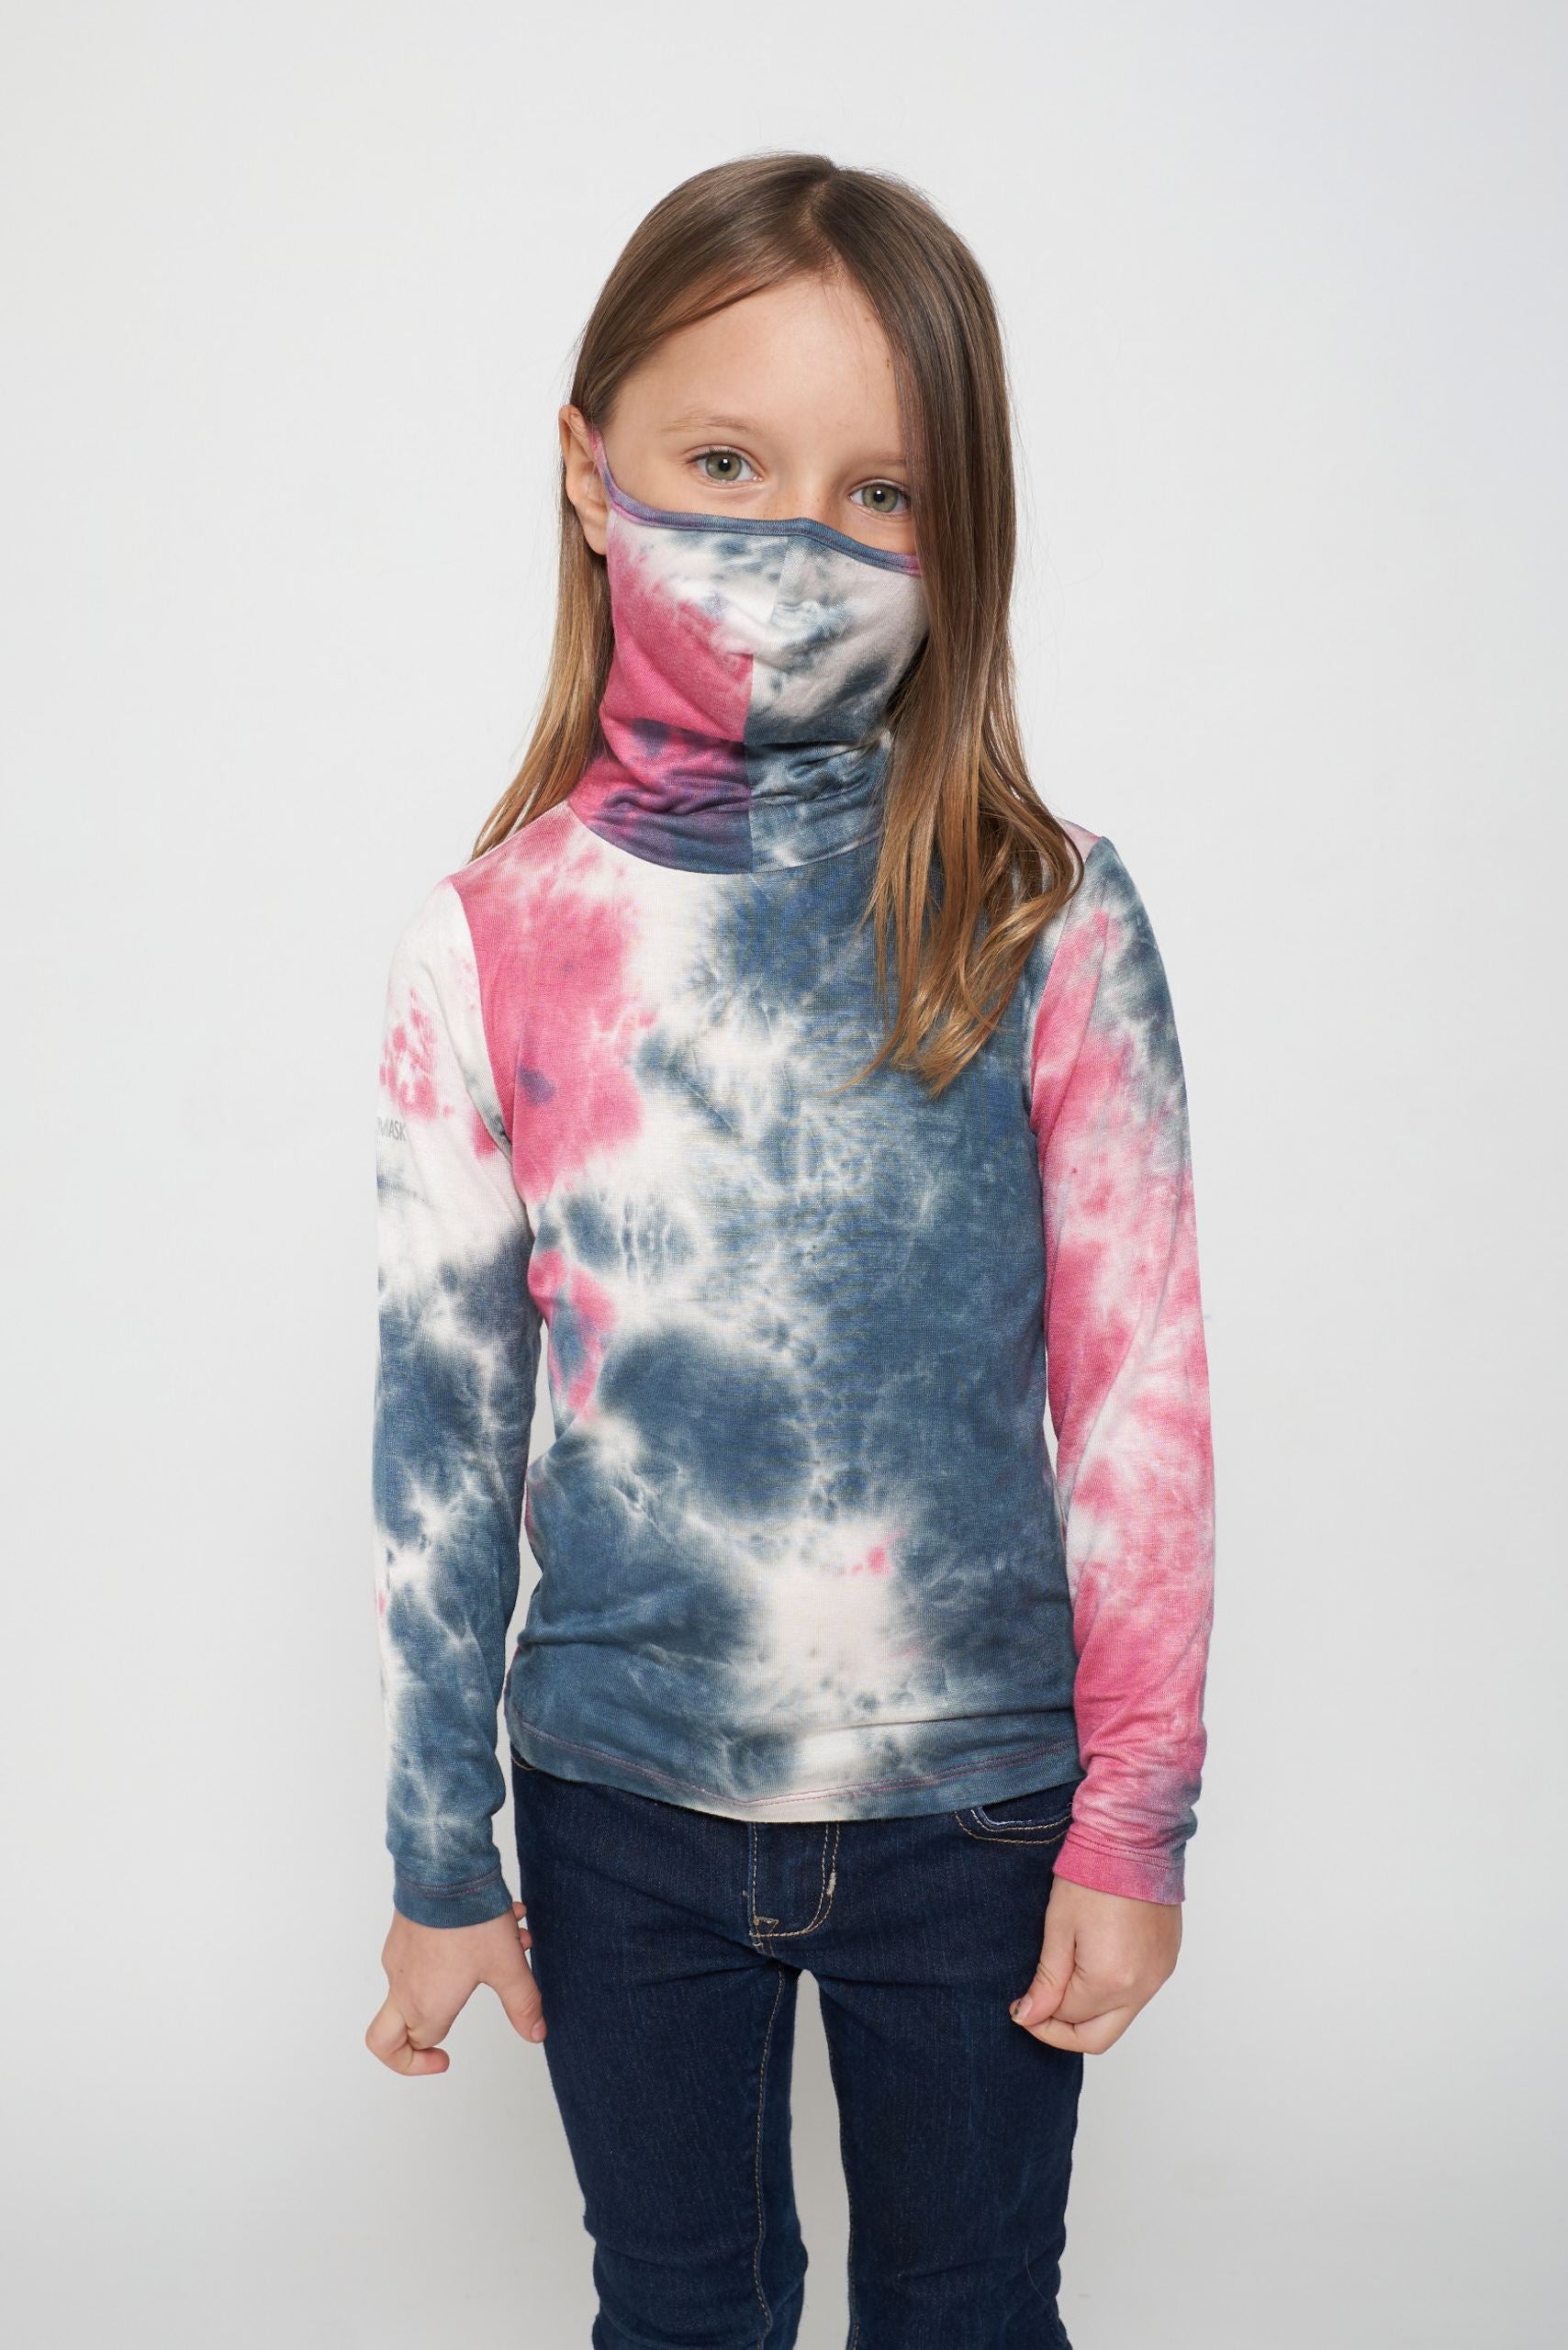 Kids Long Sleeve Pink White Tie-dye #9 Shmask™ Earloop Face Mask for Kids and Adults